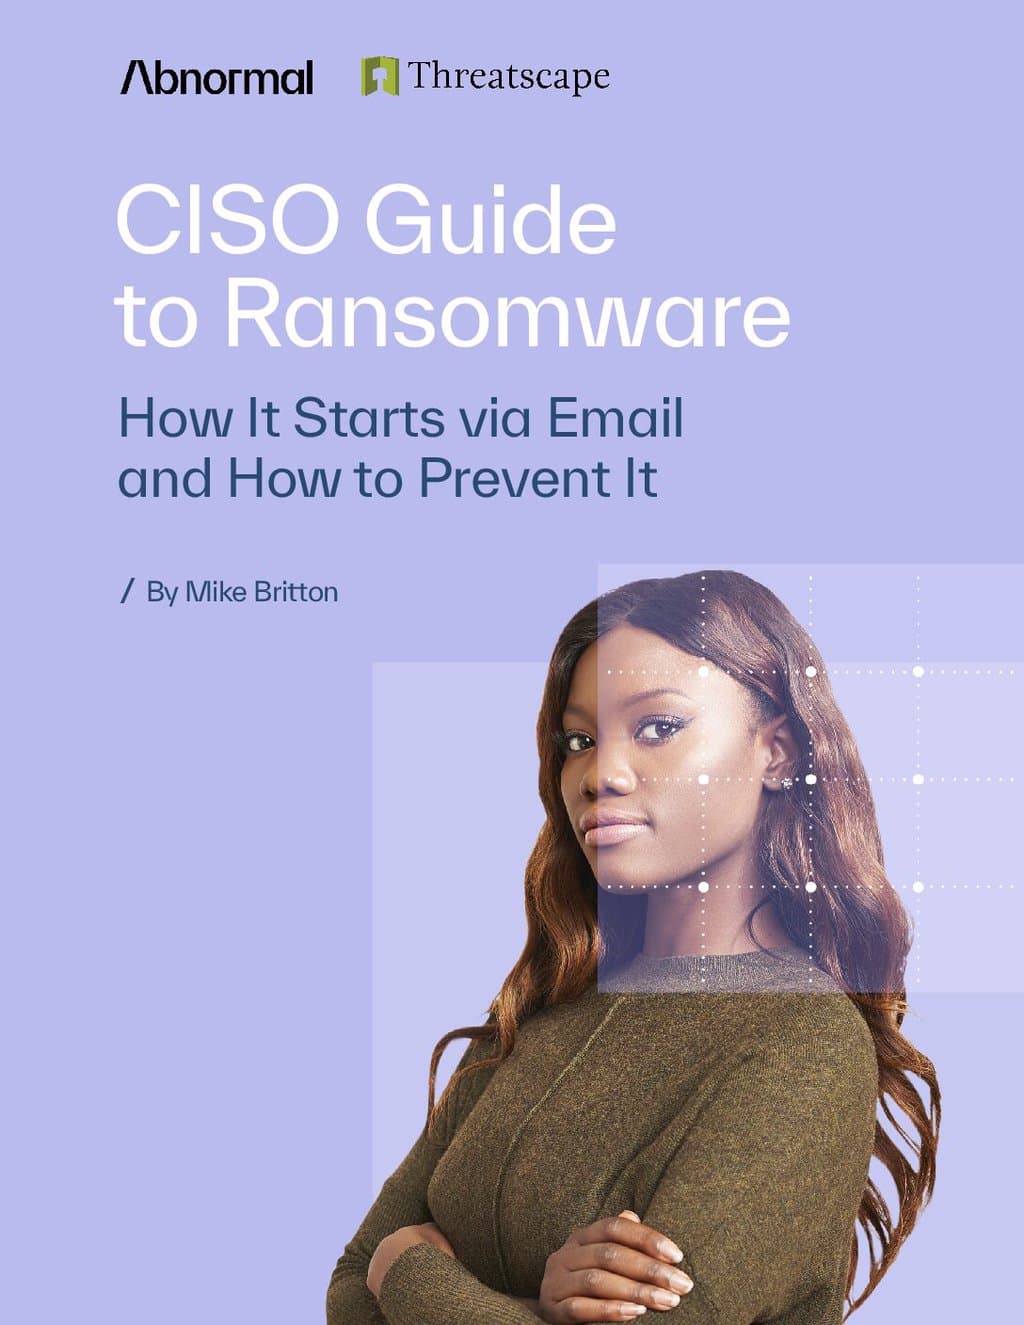 CISO Guide to Ransomware